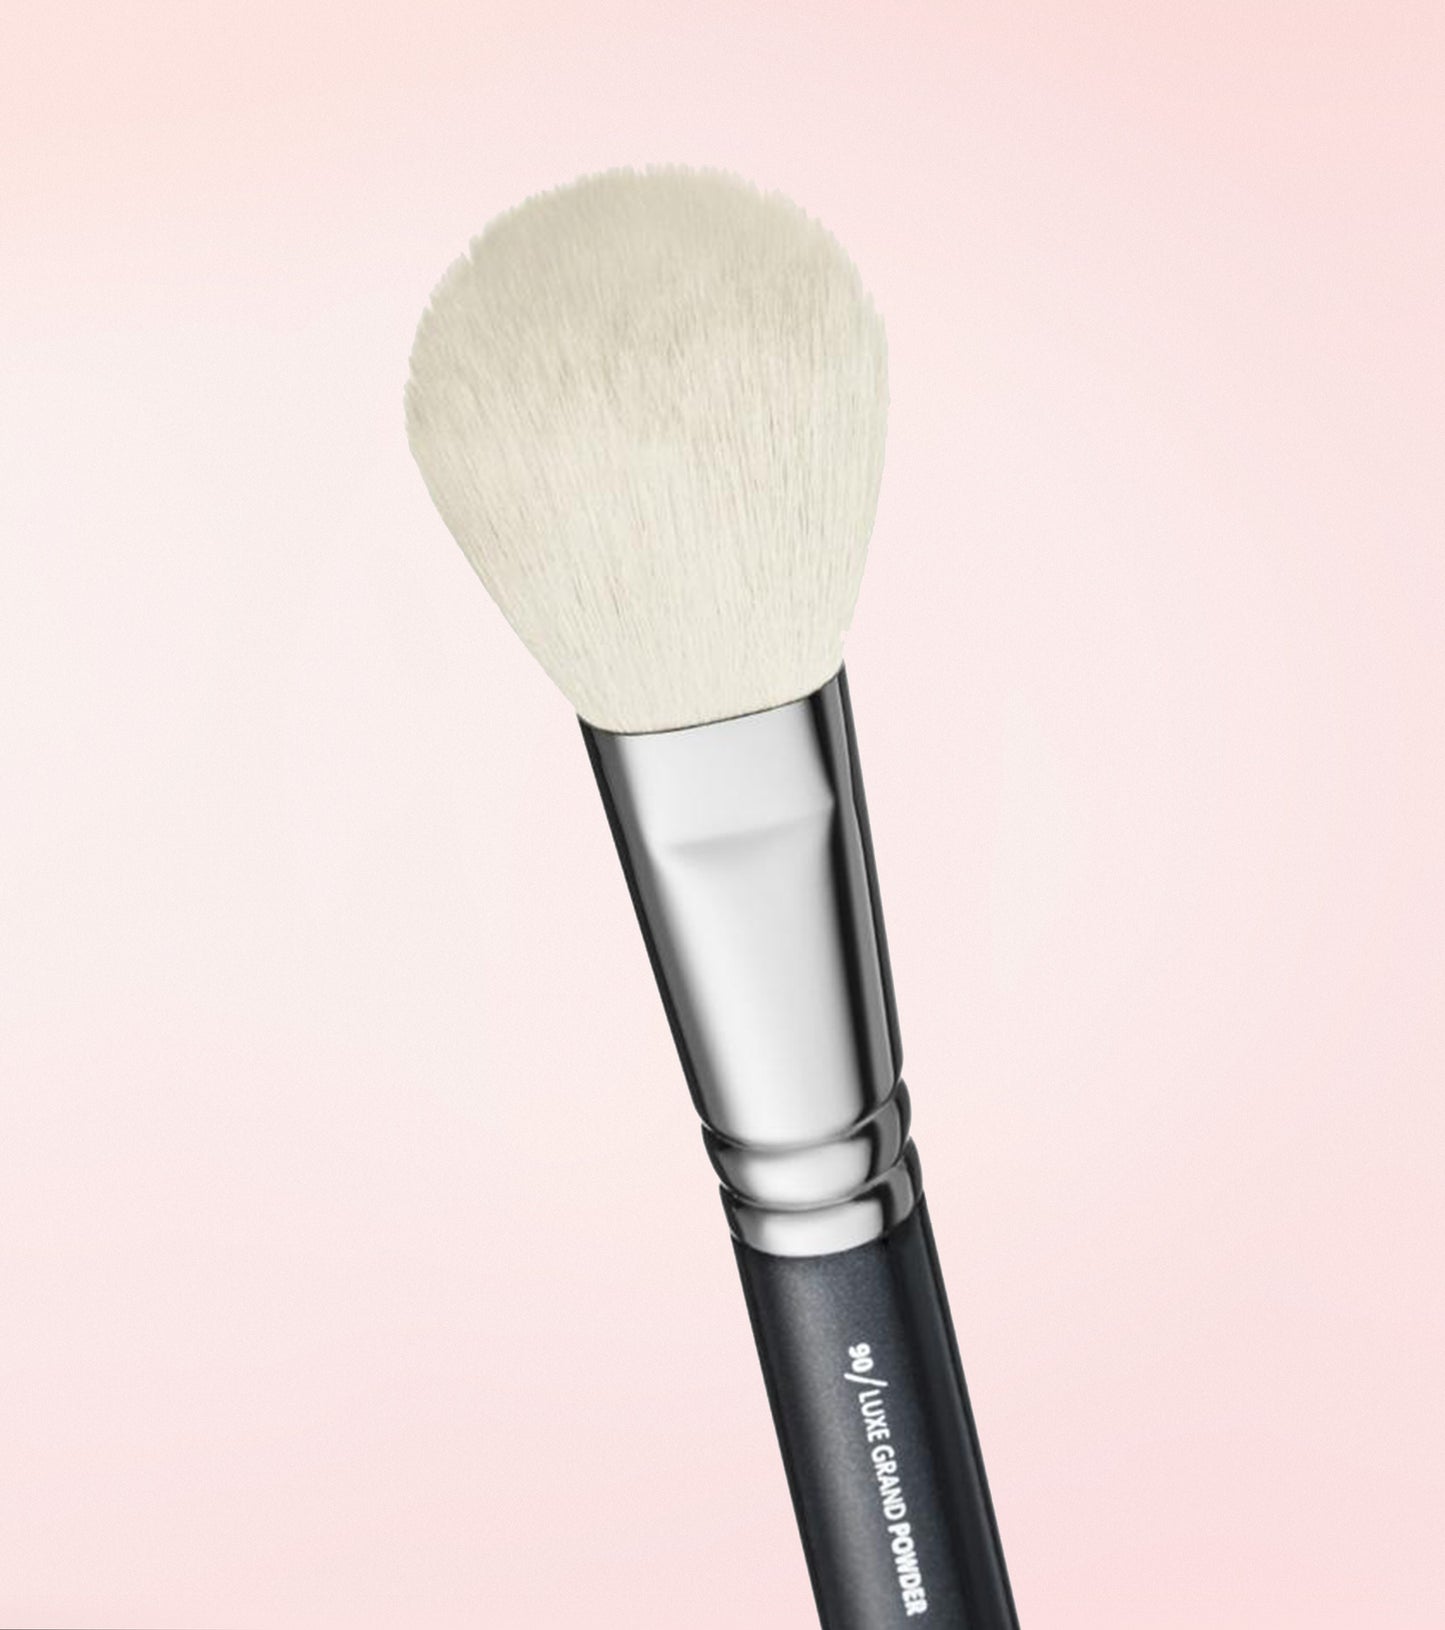 090 Luxe Grand Powder Brush Expanded Image 2